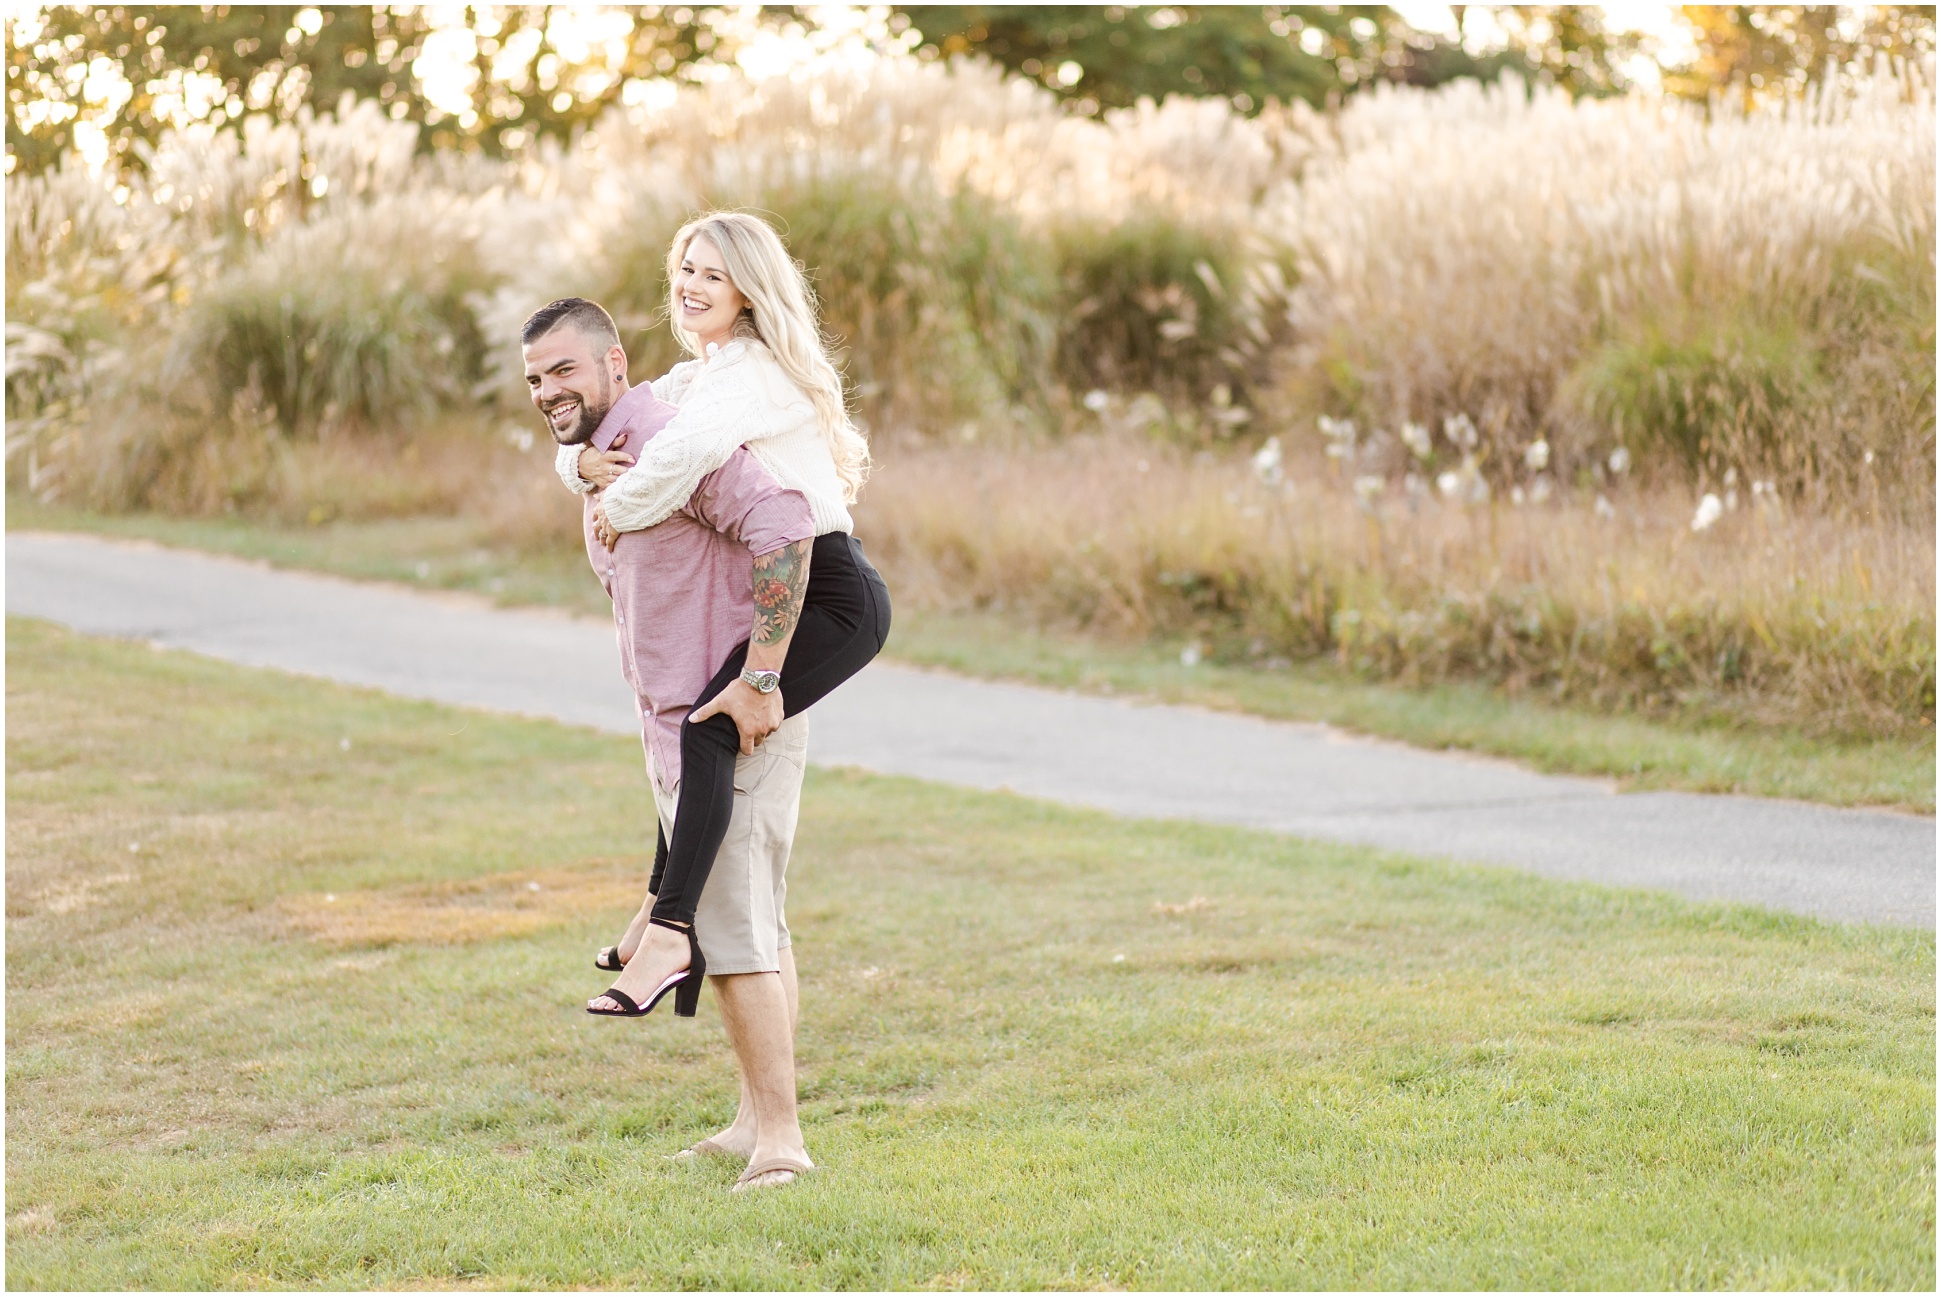 Engaged man giving his fiance a piggy back ride